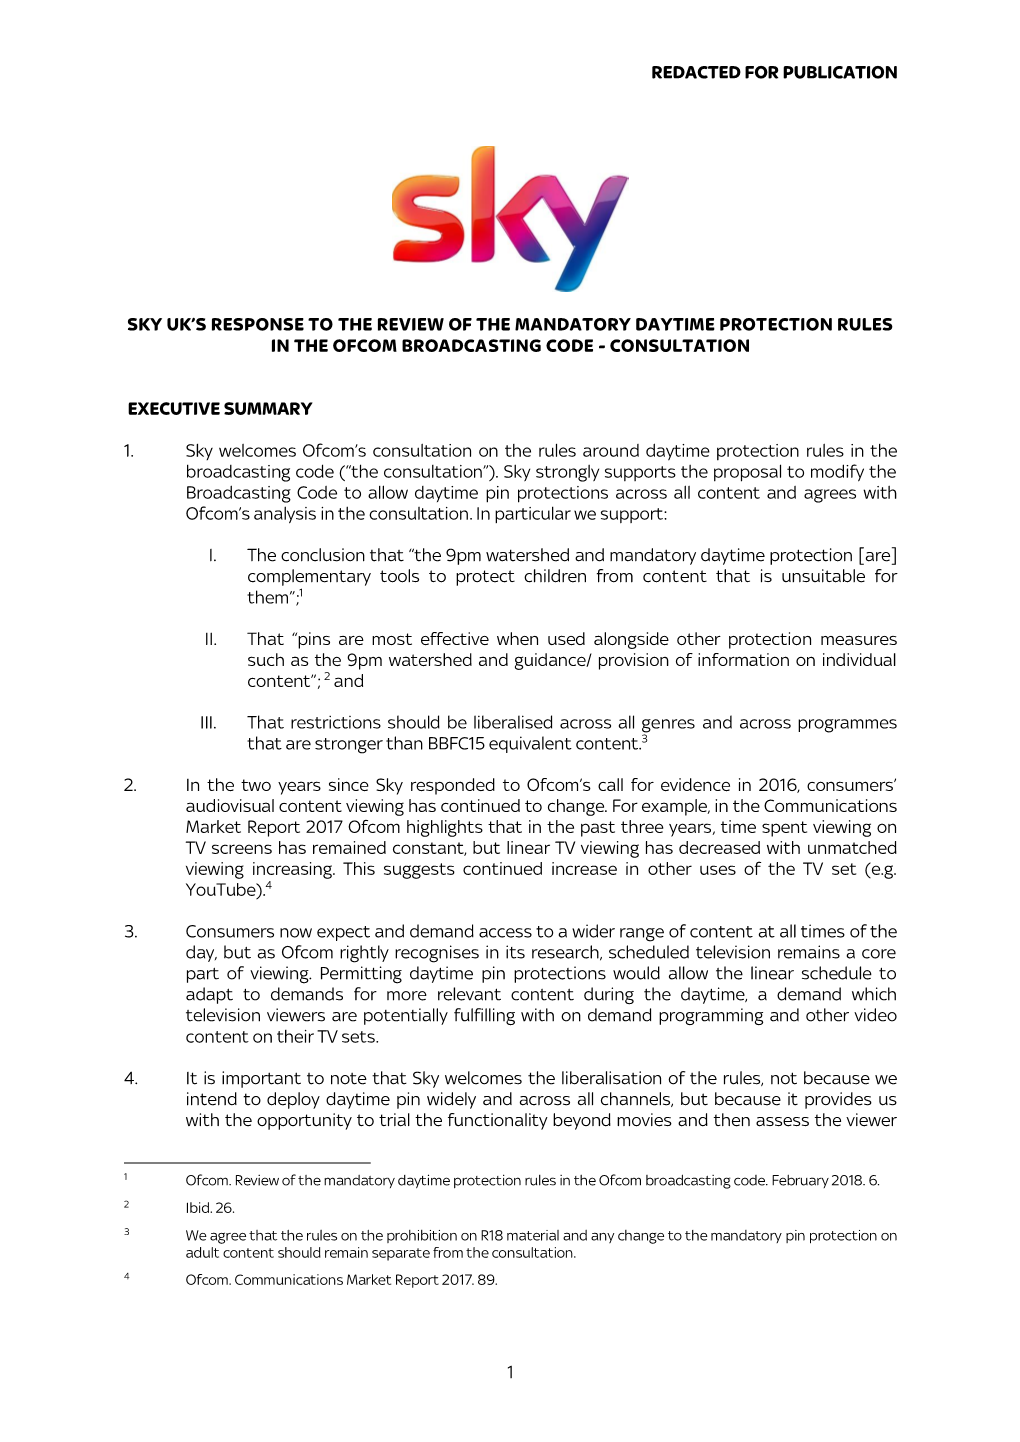 Sky Uk’S Response to the Review of the Mandatory Daytime Protection Rules in the Ofcom Broadcasting Code - Consultation